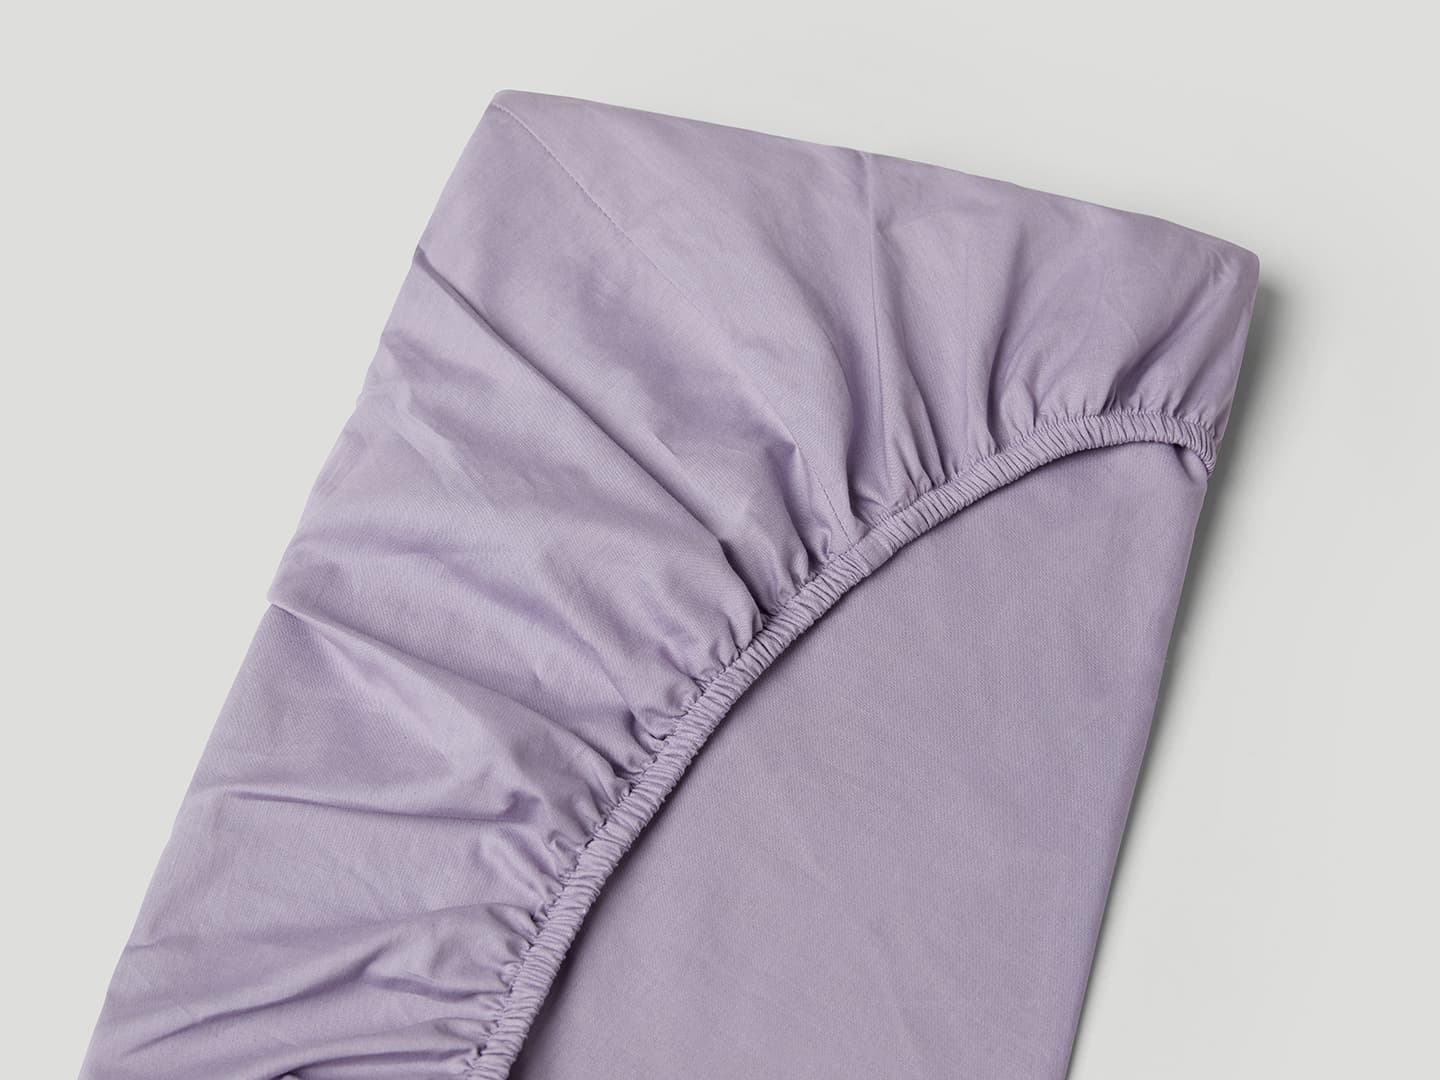 Fitted Sheet Nejd - Dusty Lilac in the group Bedding / Flat Sheets at A L V A (1140)